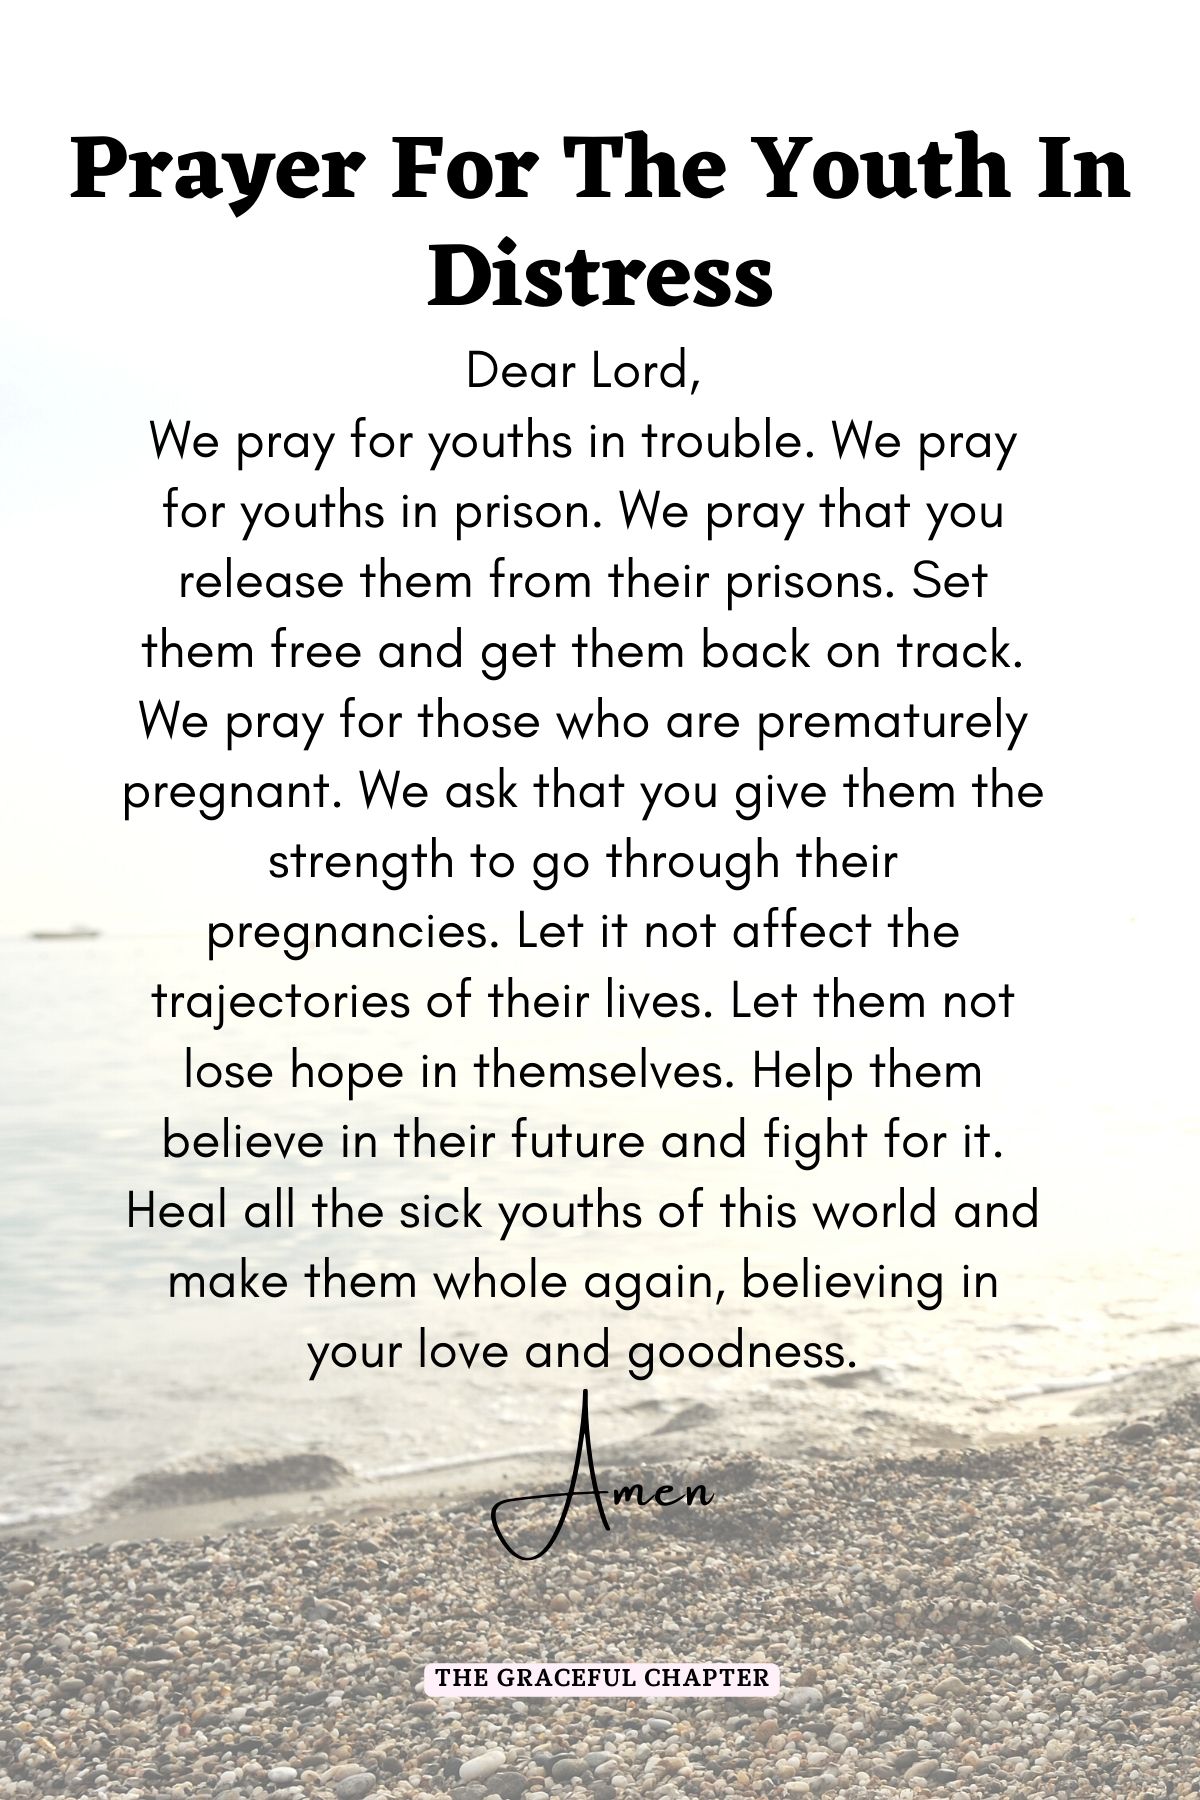 Prayer for the youth in distress